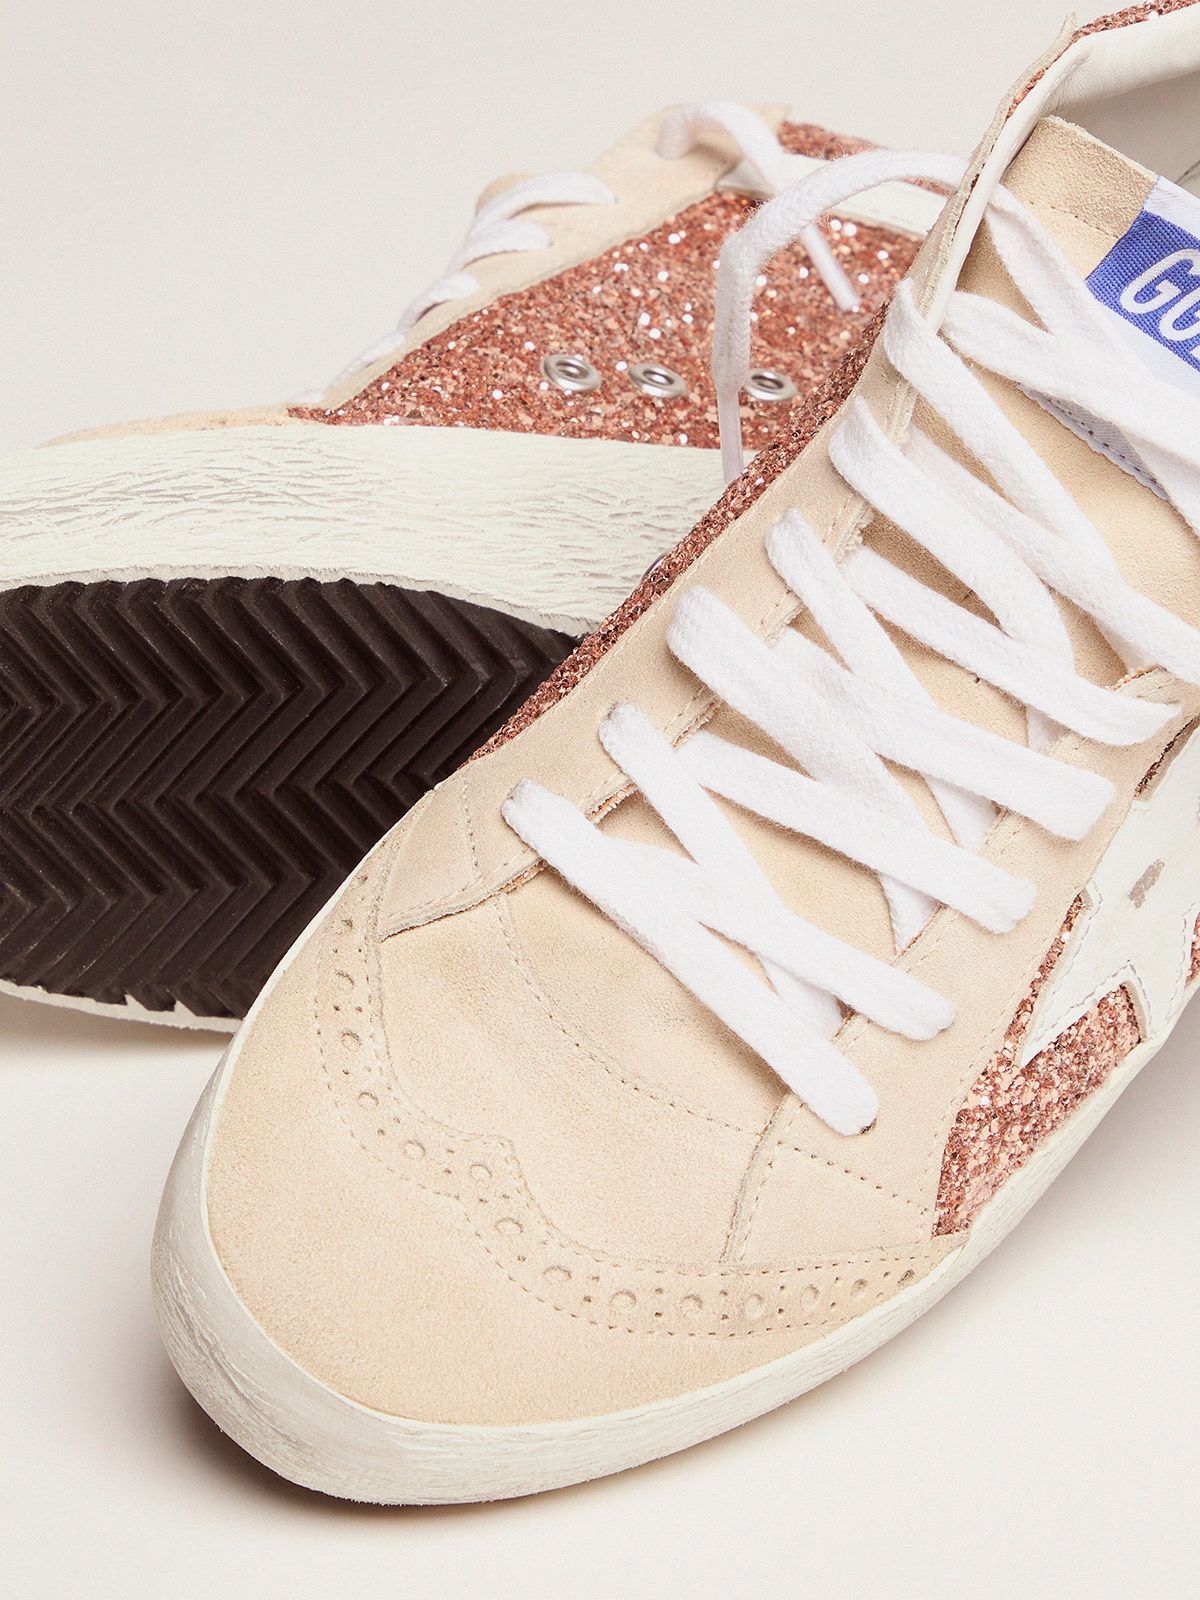 Mid Star Sneakers With Pink Gold Glitter Golden Goose